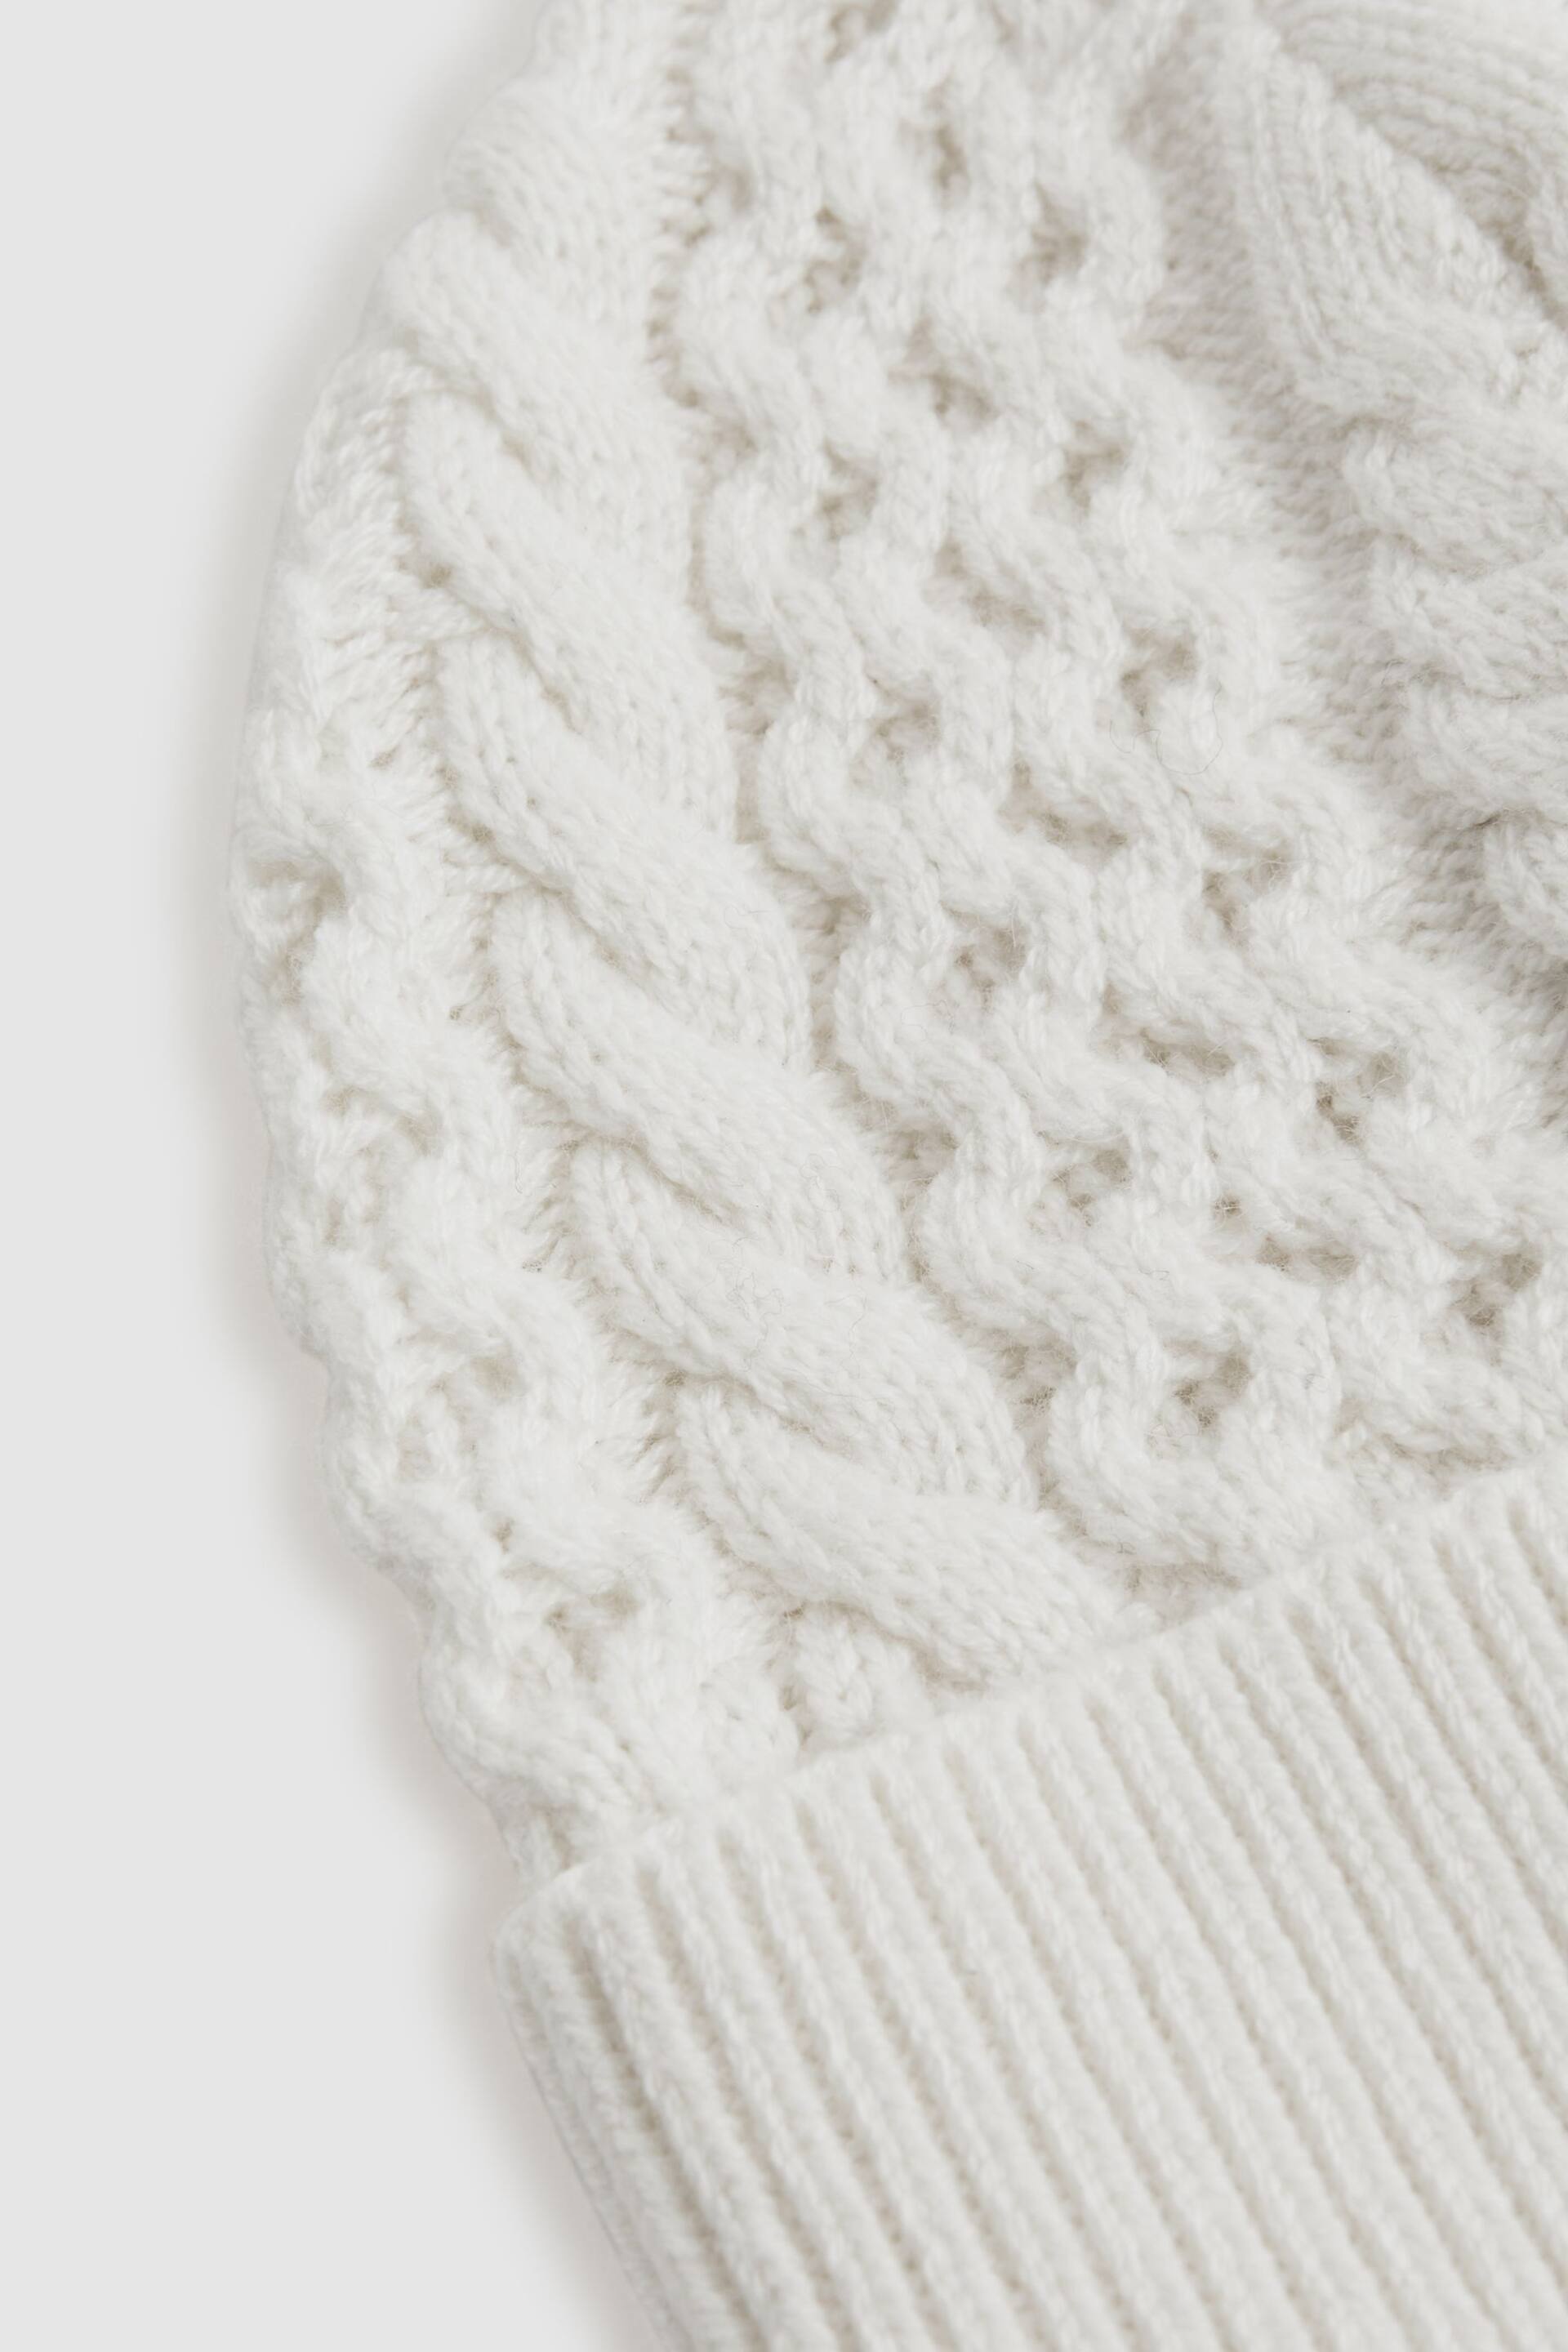 Reiss Ecru Heath Junior Knitted Scarf and Beanie Hat Set - Image 5 of 5